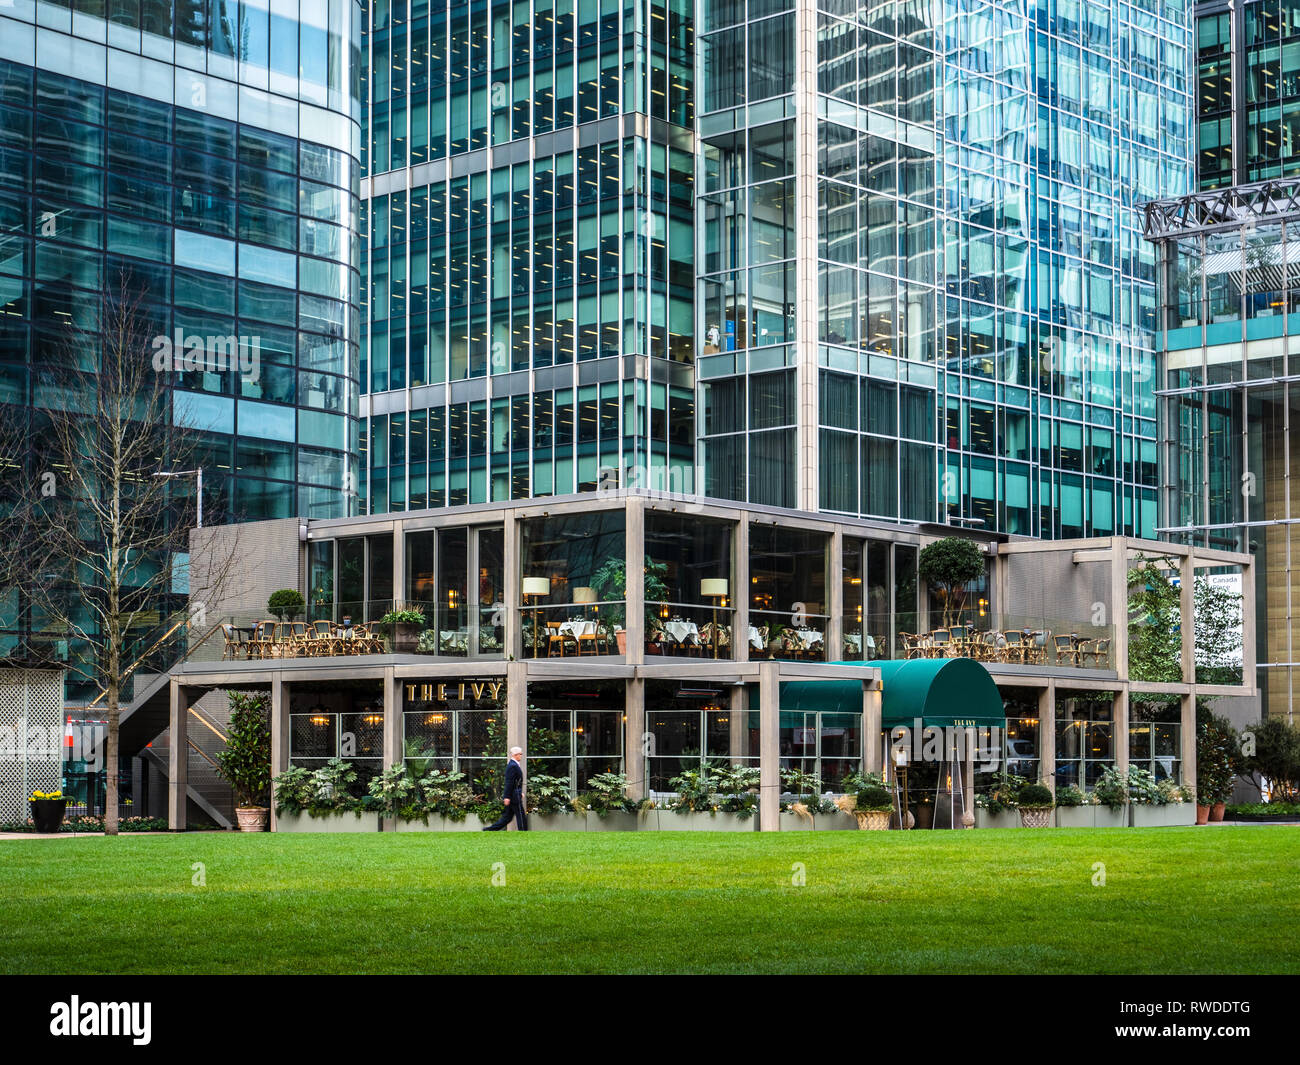 The Ivy in the Park Restaurant in Canada Square Park in der Canary Wharf Development London. Ivy Restaurant Canary Wharf London. Stockfoto